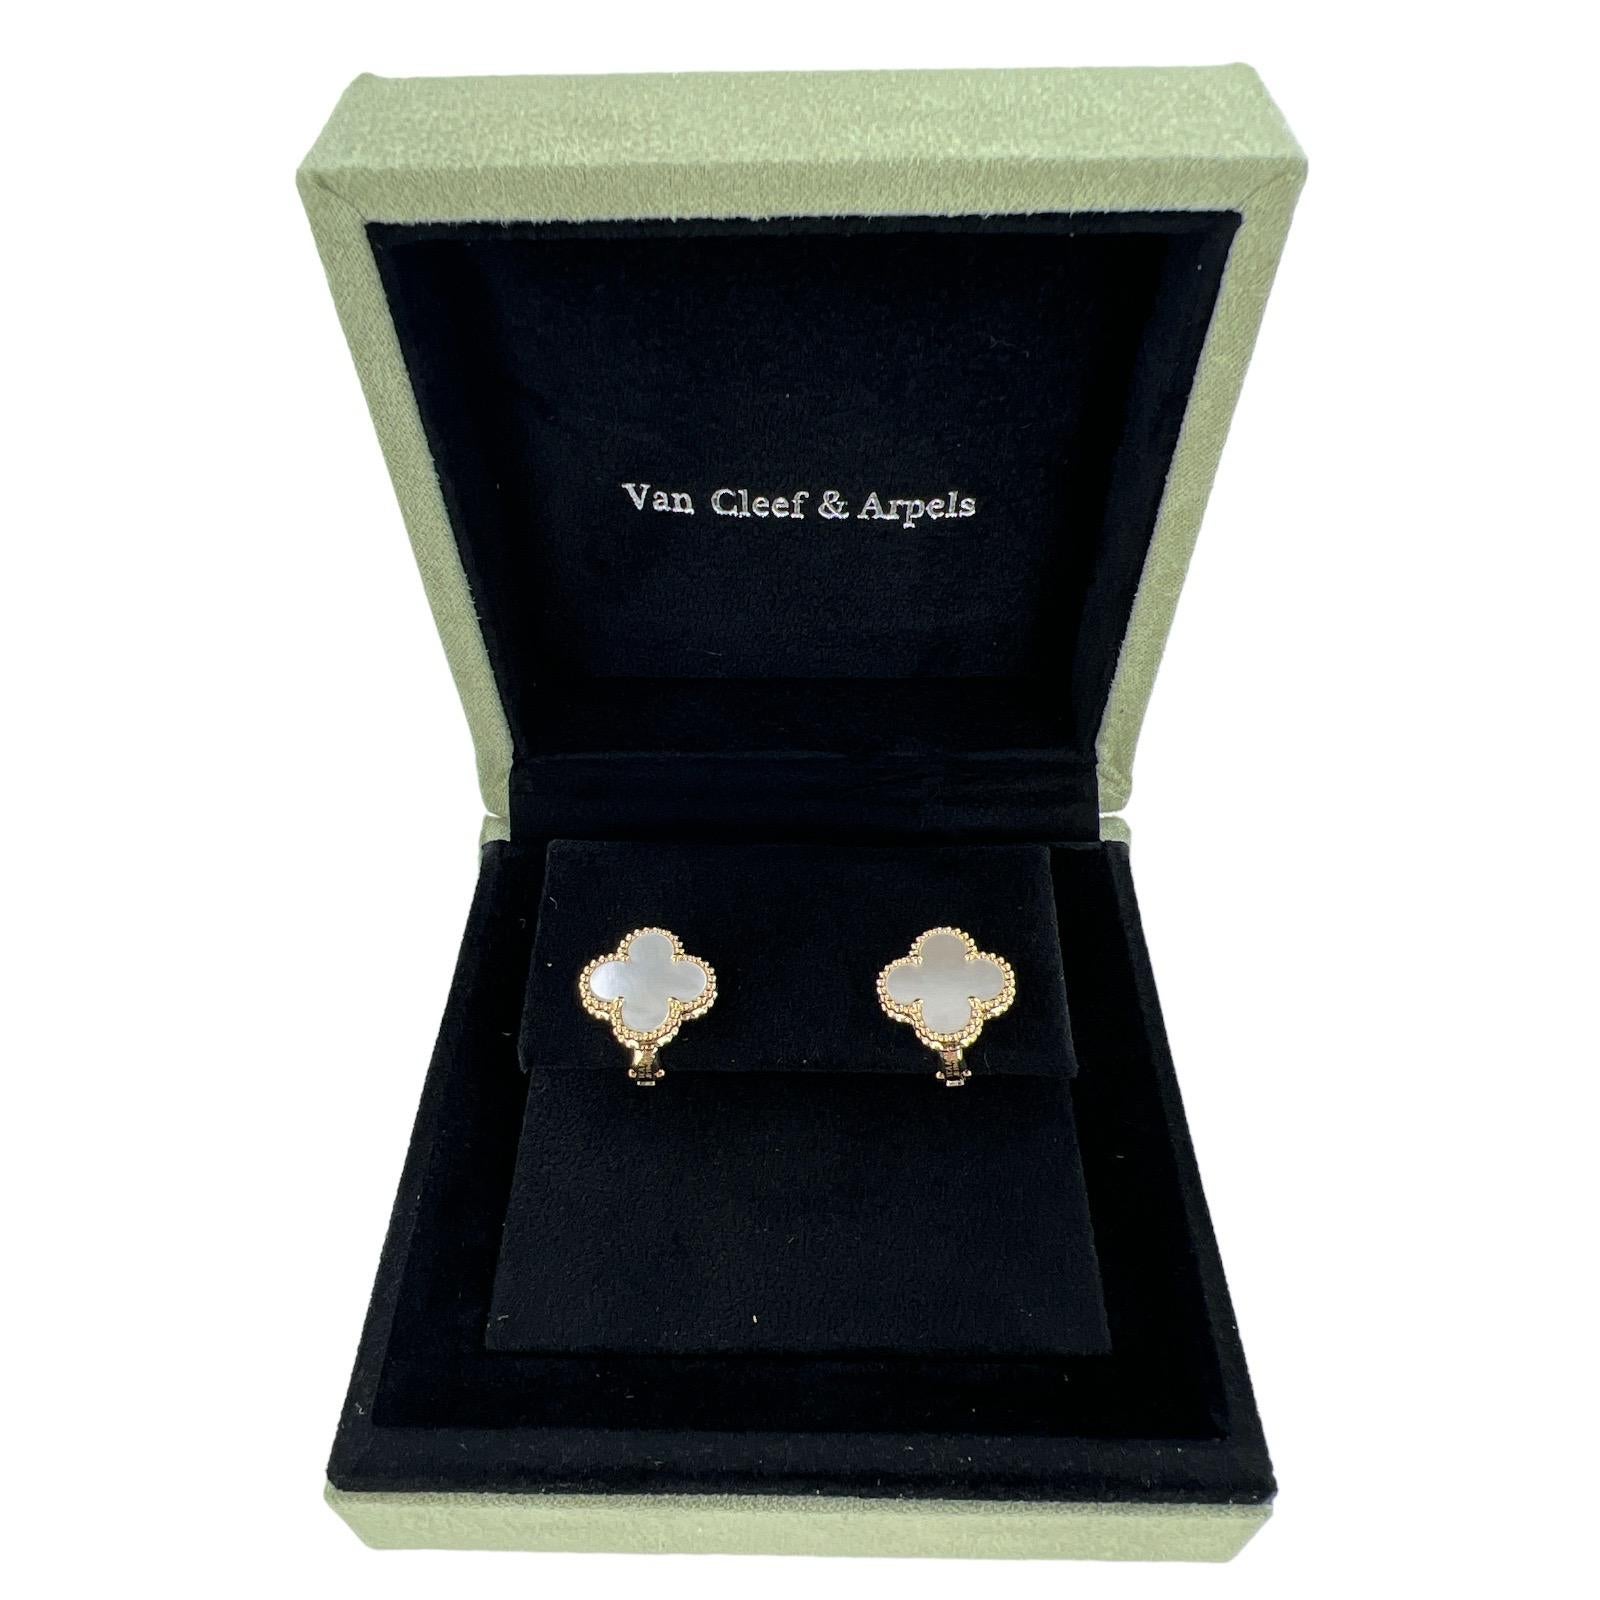 Authentic Van Cleef & Arpels Vintage Alhambra Mother of Pearl earrings crafted in 18 karat yellow gold.  The earrings measures 15 x 15mm, they are signed, hallmarked and numbered. Come in original box with original paperwork. Circa 2019.

